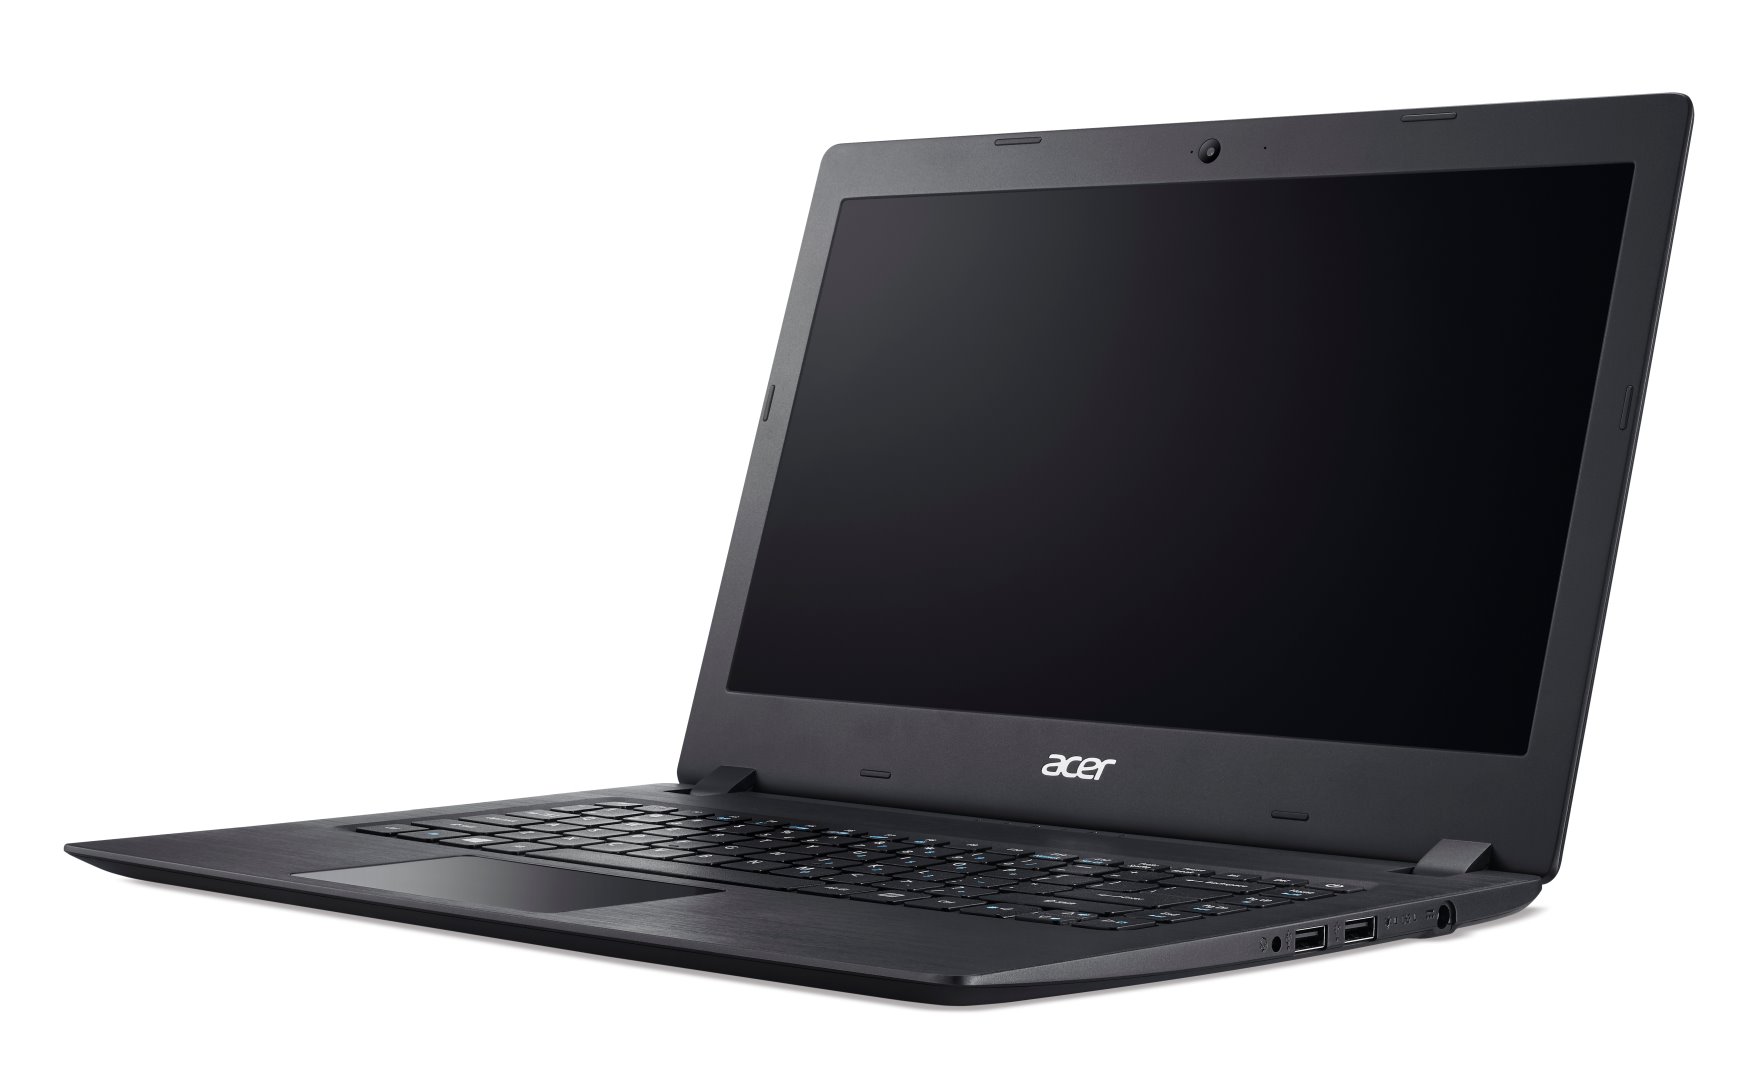 Fobia Admirable Margarita Acer Aspire 1 (A114-31/32) - Specs, Tests, and Prices | LaptopMedia UK